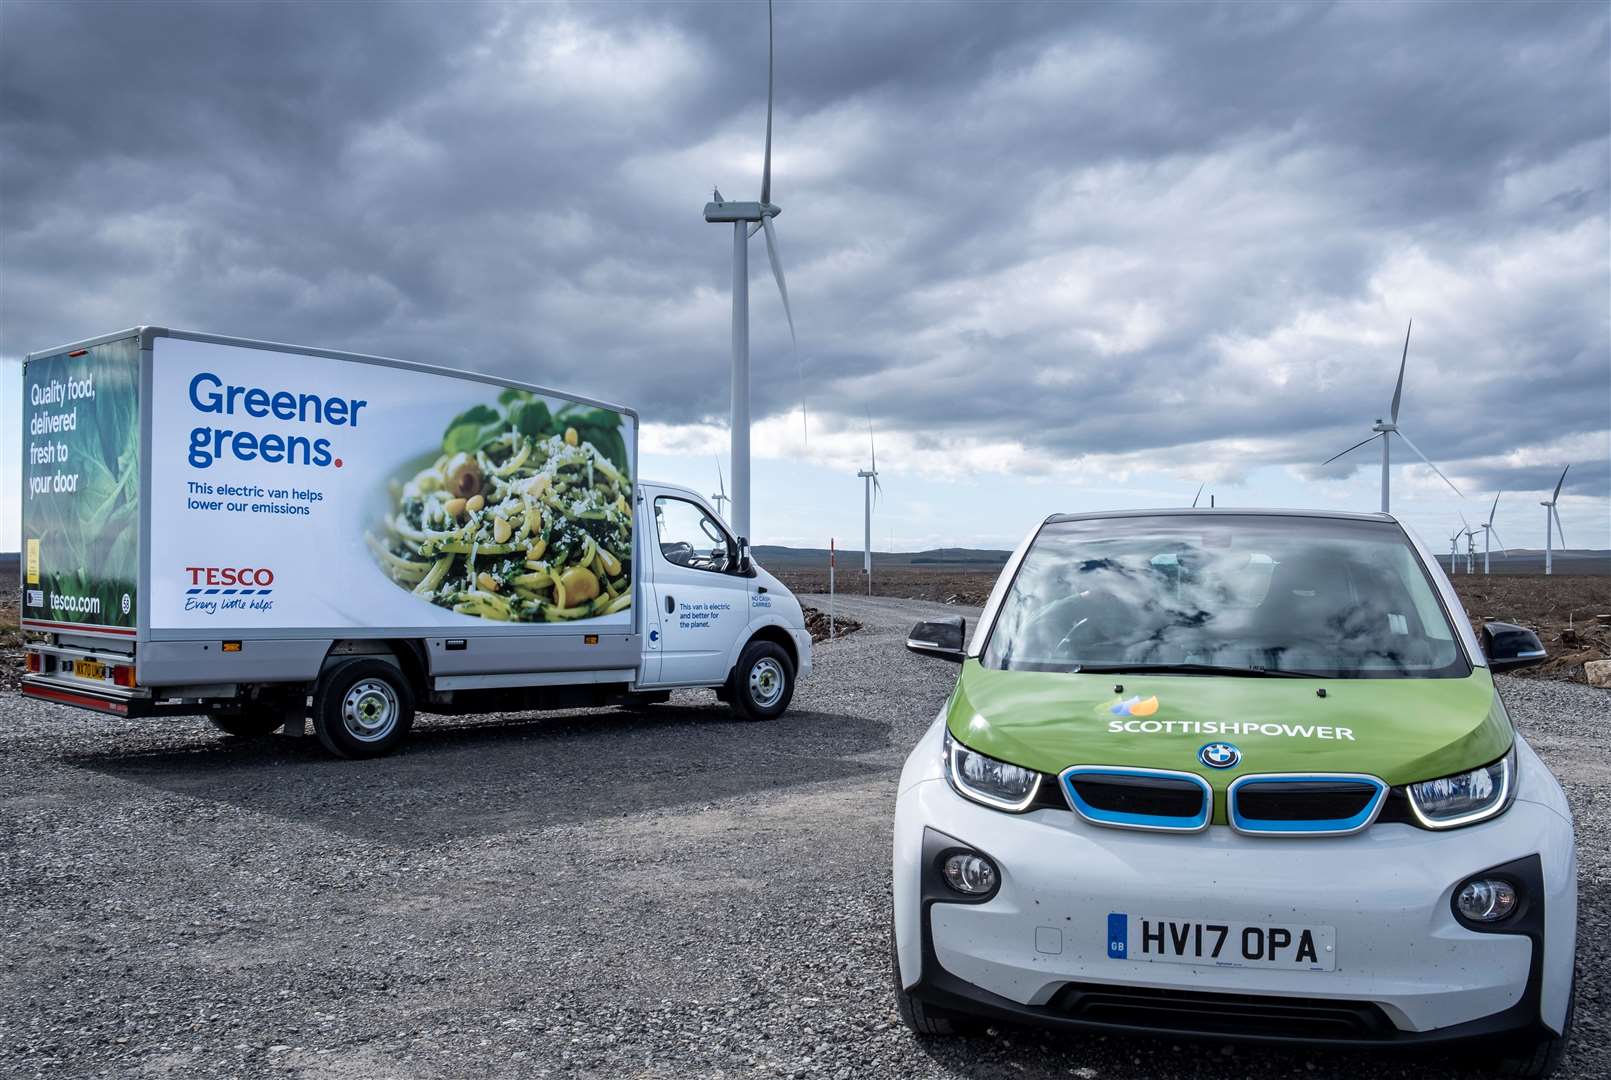 Tesco and ScottishPower Renewables vehicles at the Halsary wind farm site, south of Spittal.